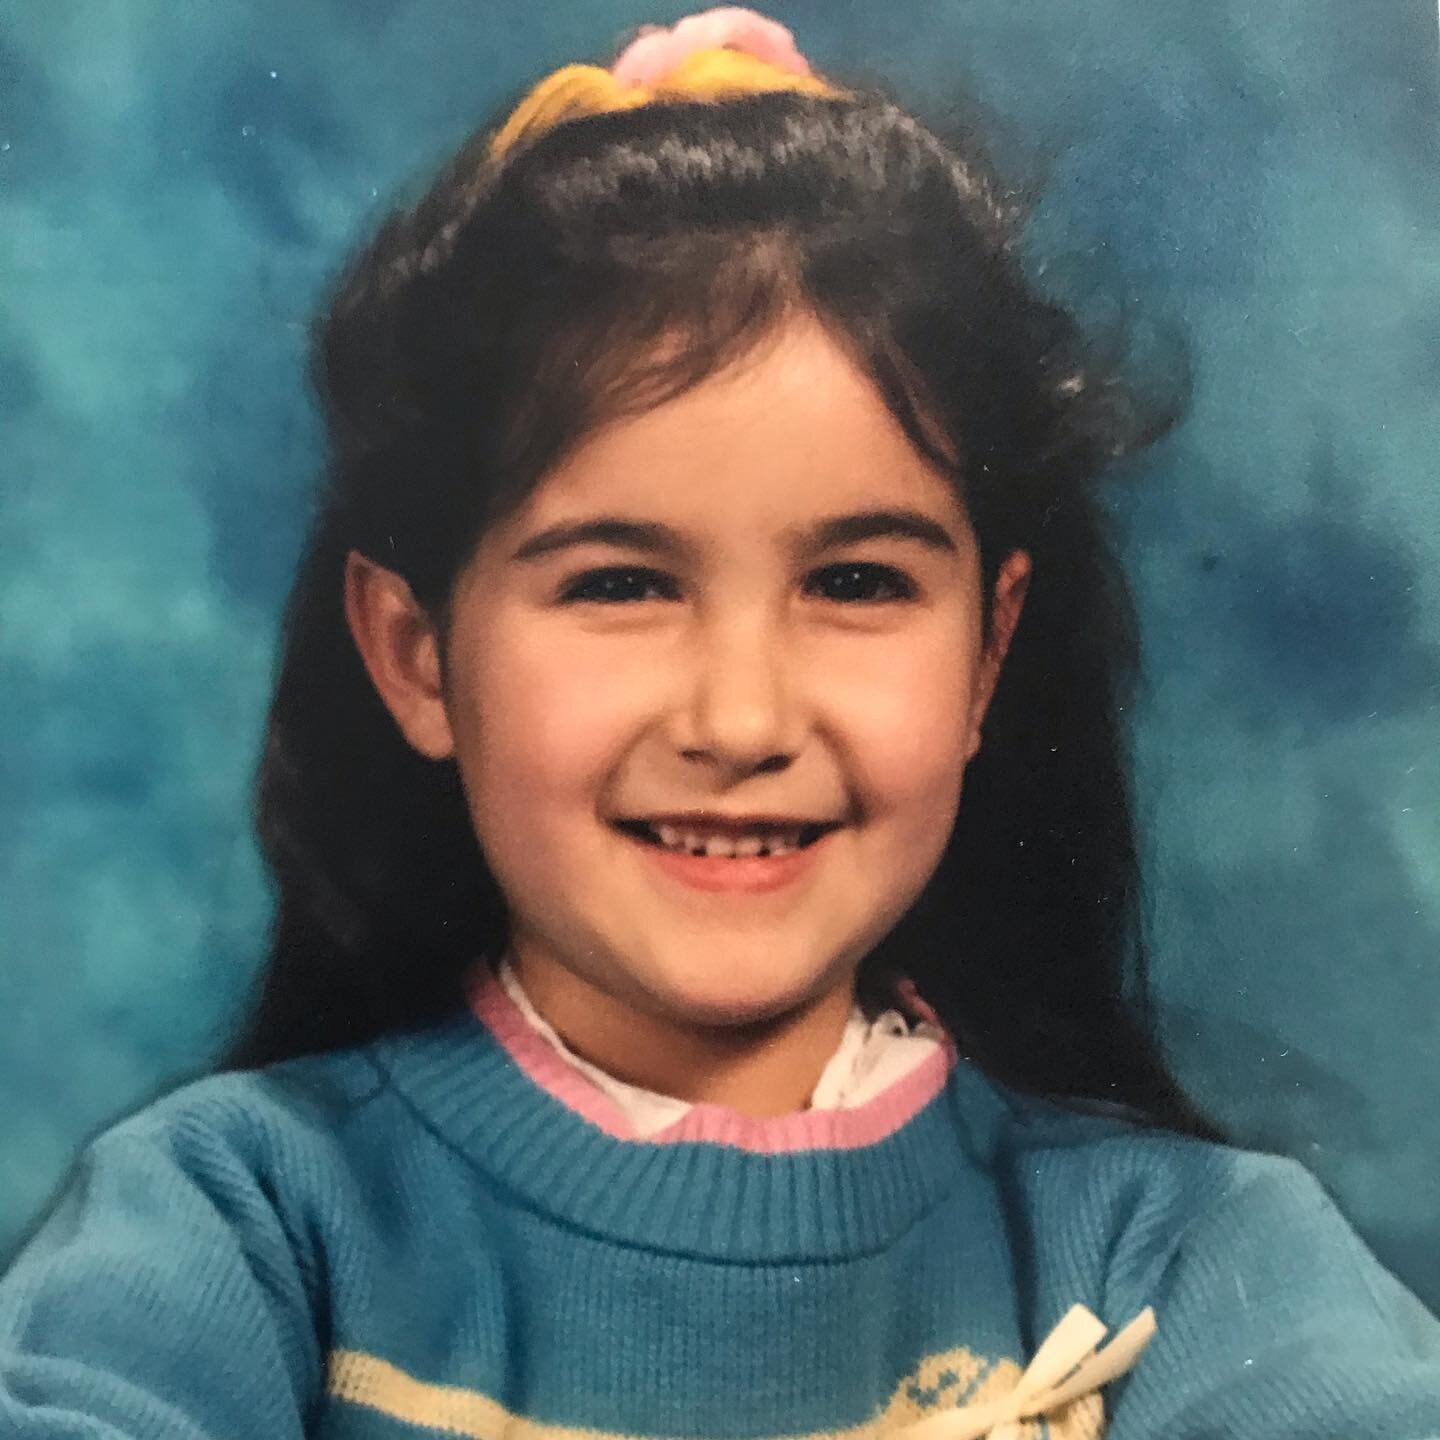 Here&rsquo;s me in all my first grade glory, thick yarn bows in my hair and all! I loved to write and illustrate stories, dance during quiet time, teach my classmates how to read, and help people feel welcome and included. The seeds of who I am today